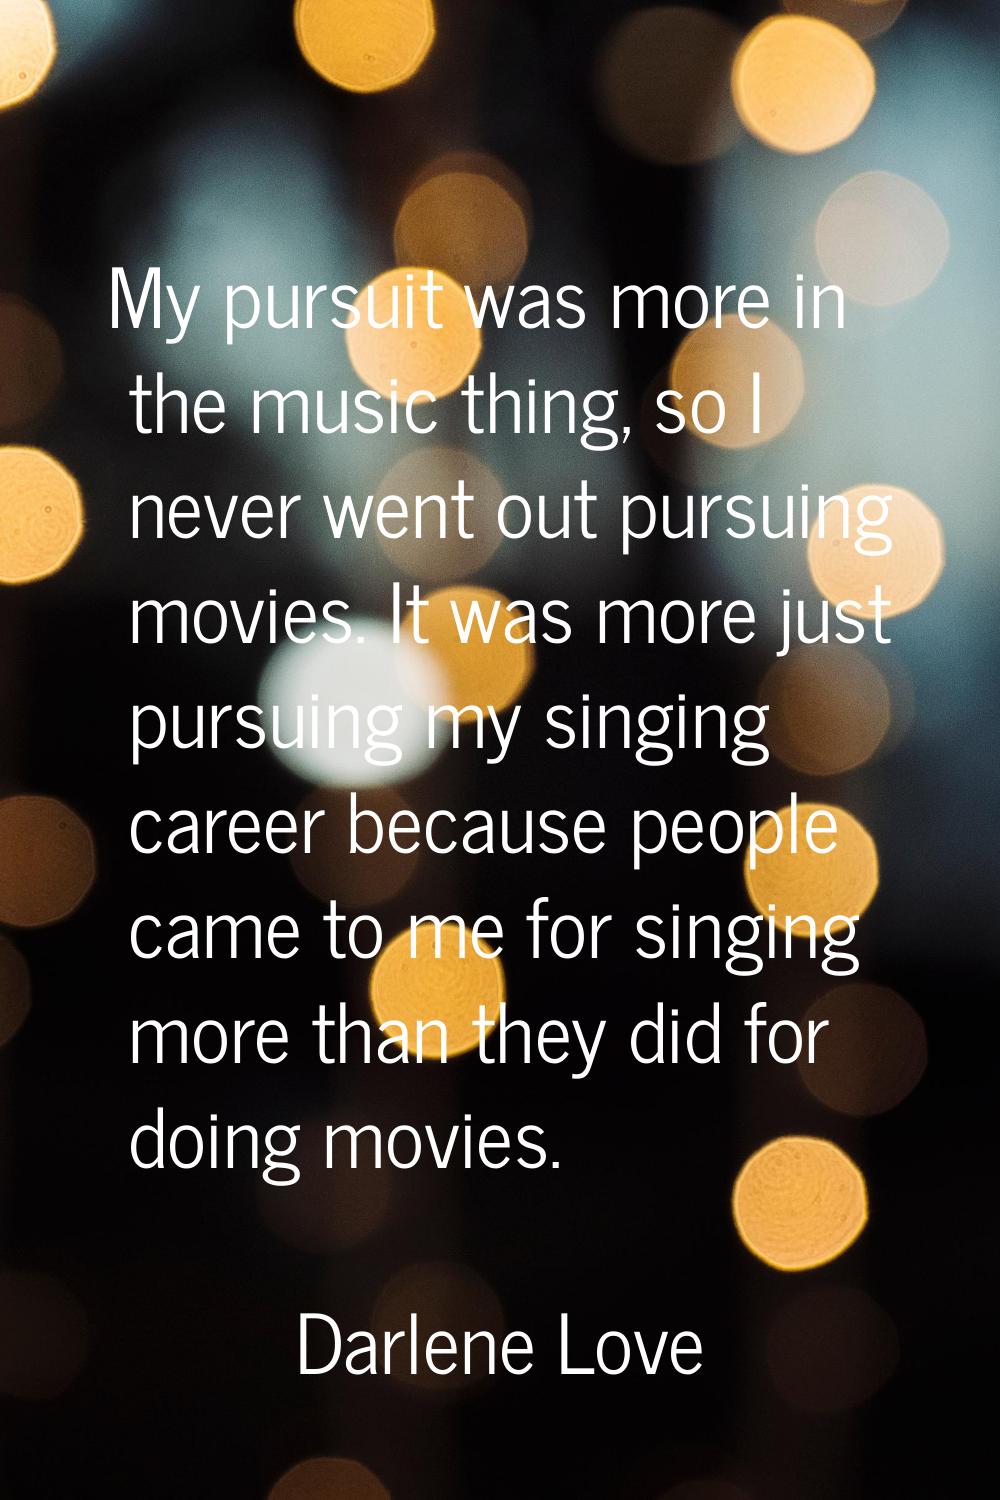 My pursuit was more in the music thing, so I never went out pursuing movies. It was more just pursu